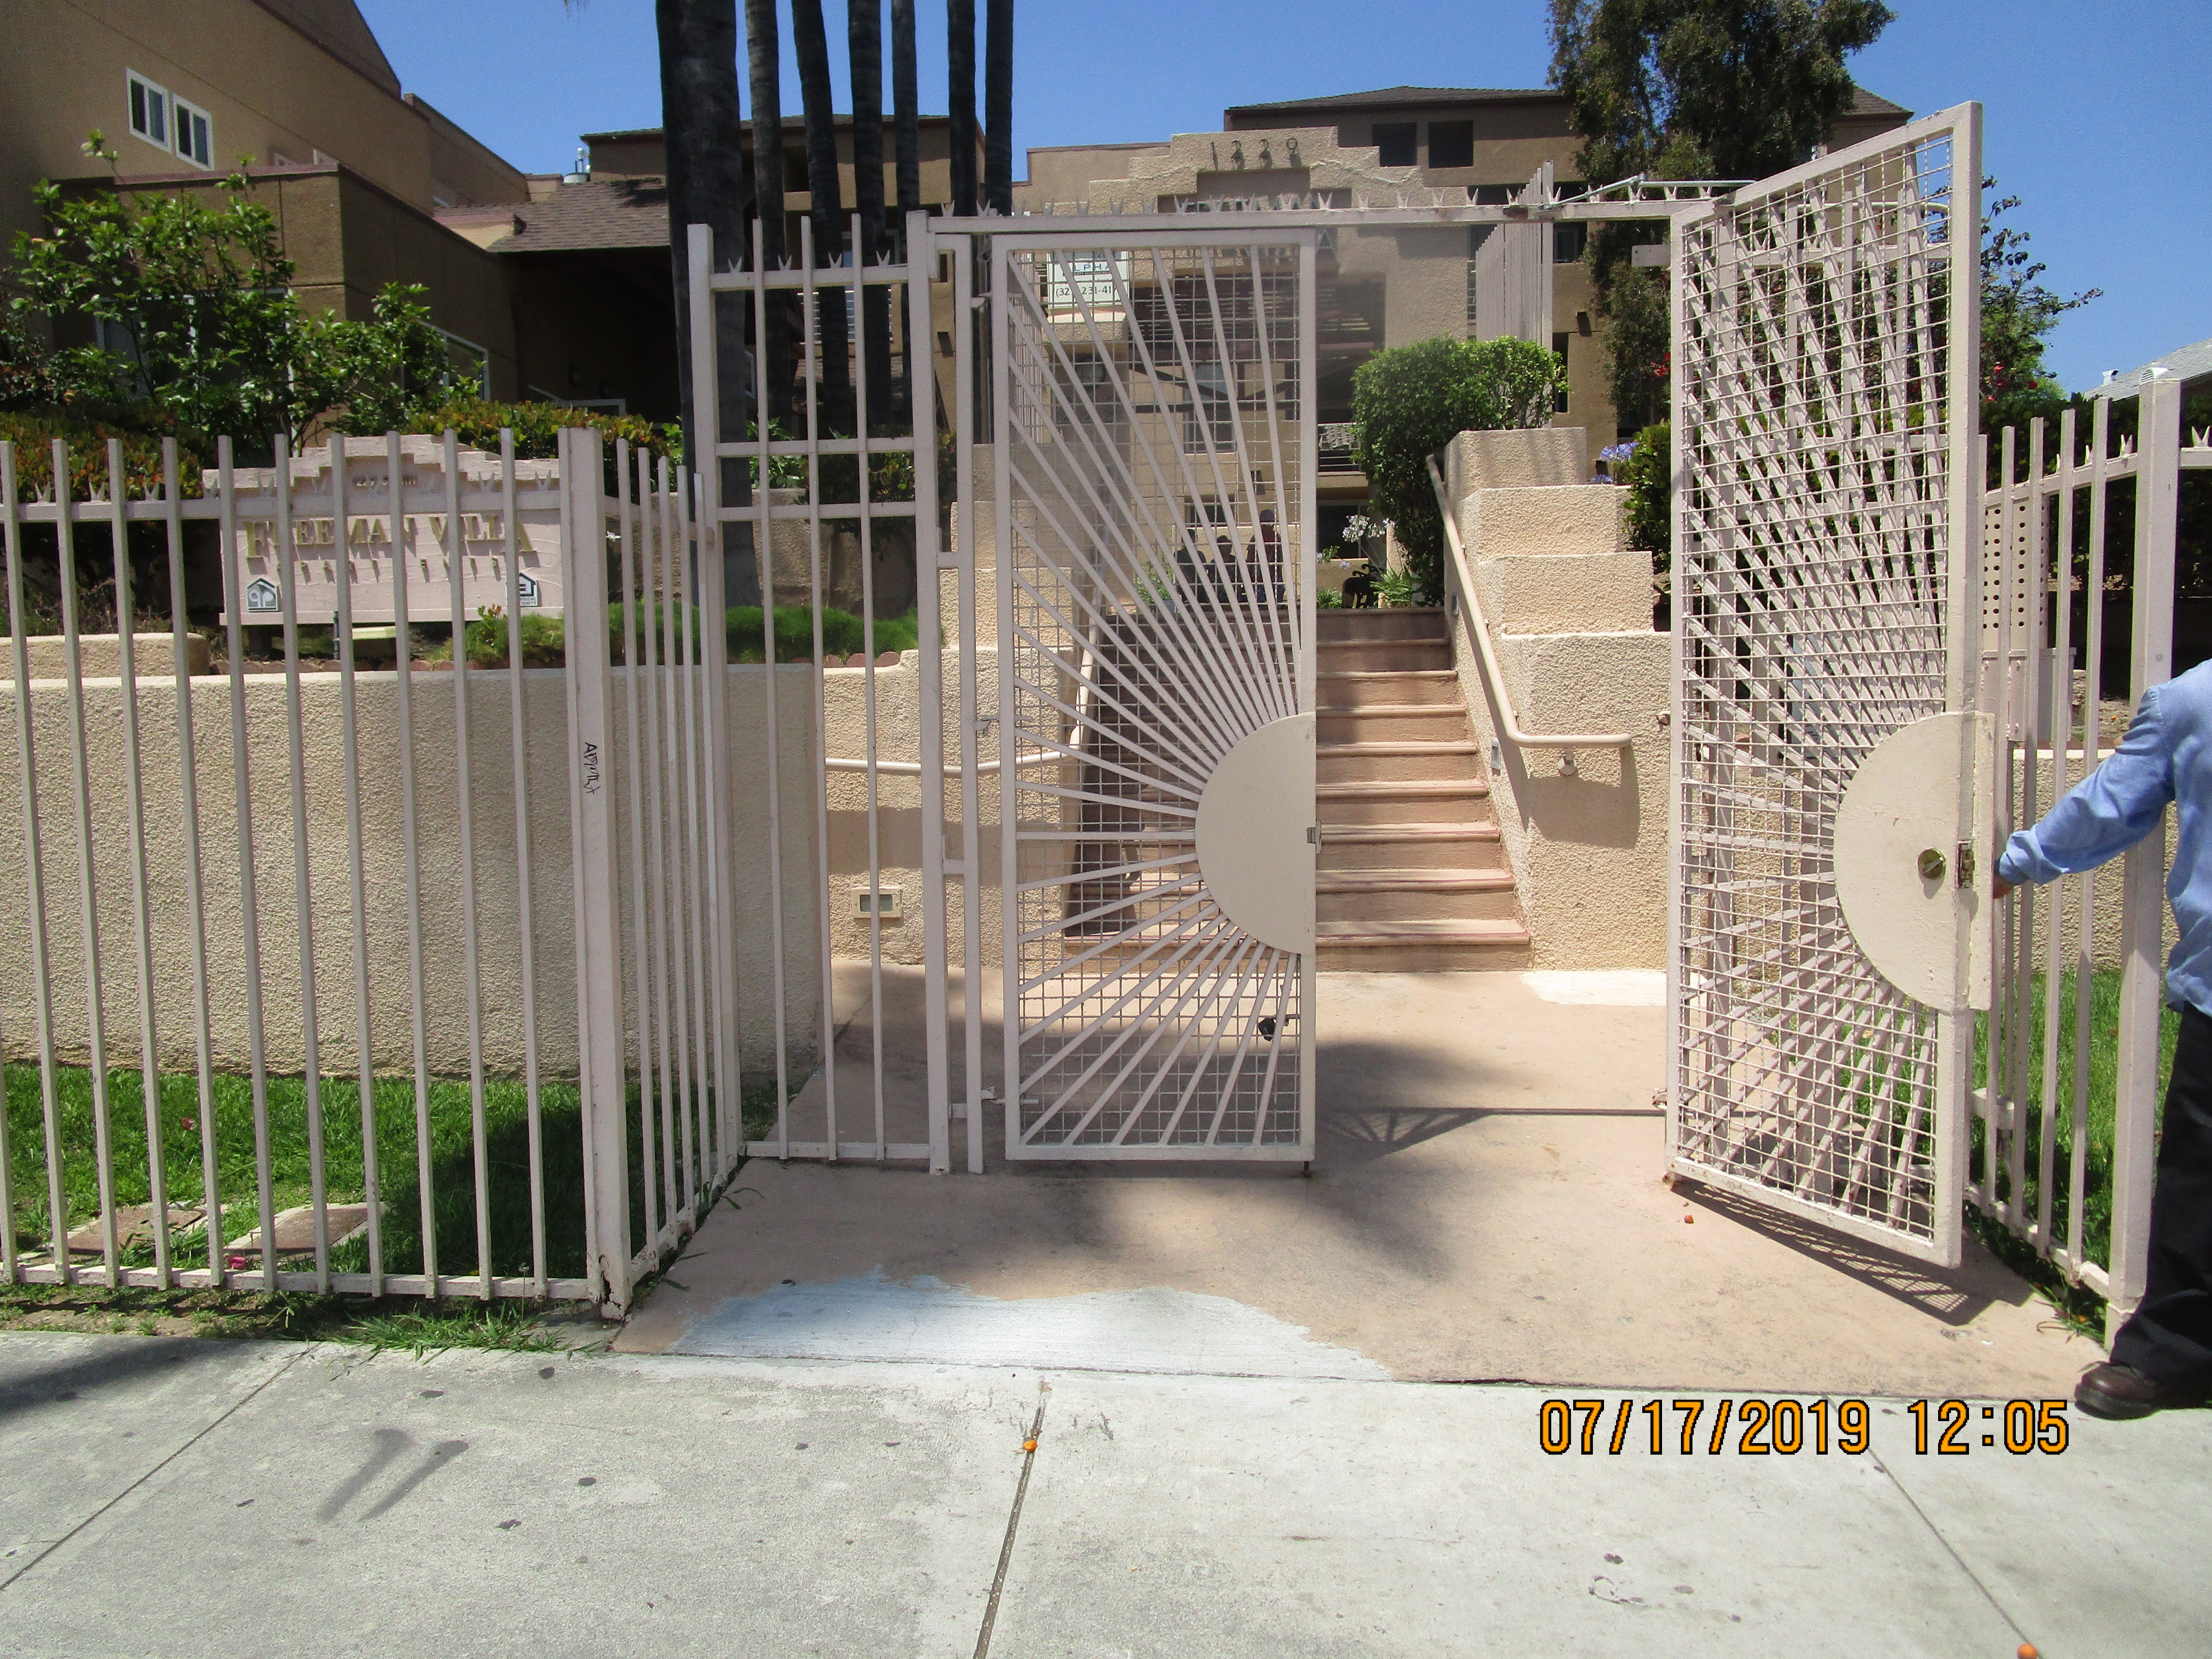 Exterior view of the gated entrance to Freeman Villas